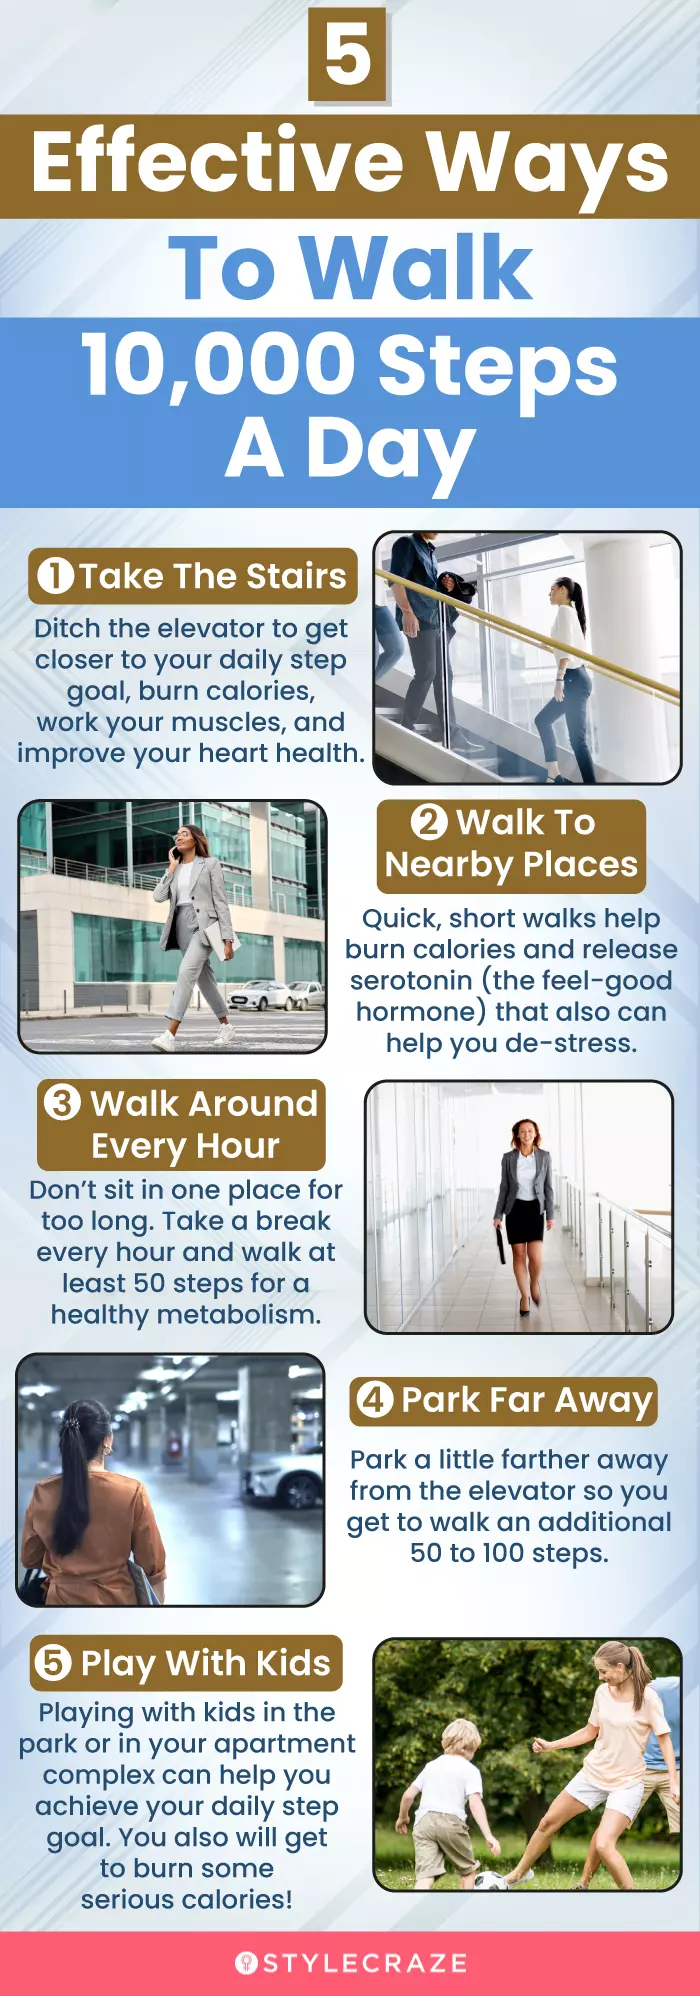 5 effective ways to walk 10,000 steps a day (infographic)